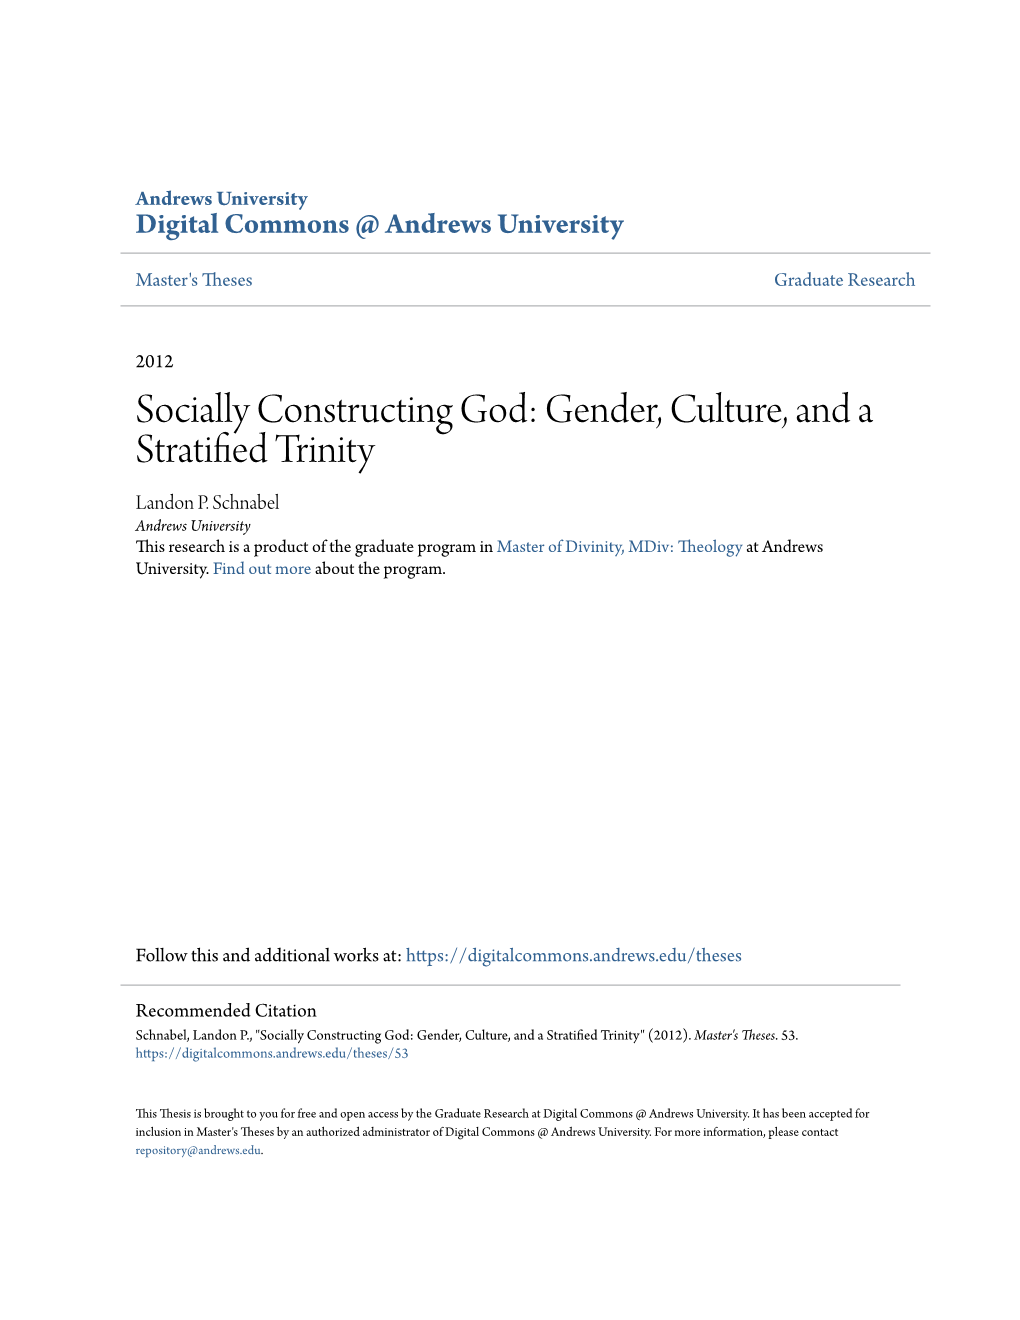 Gender, Culture, and a Stratified Trinity" (2012)